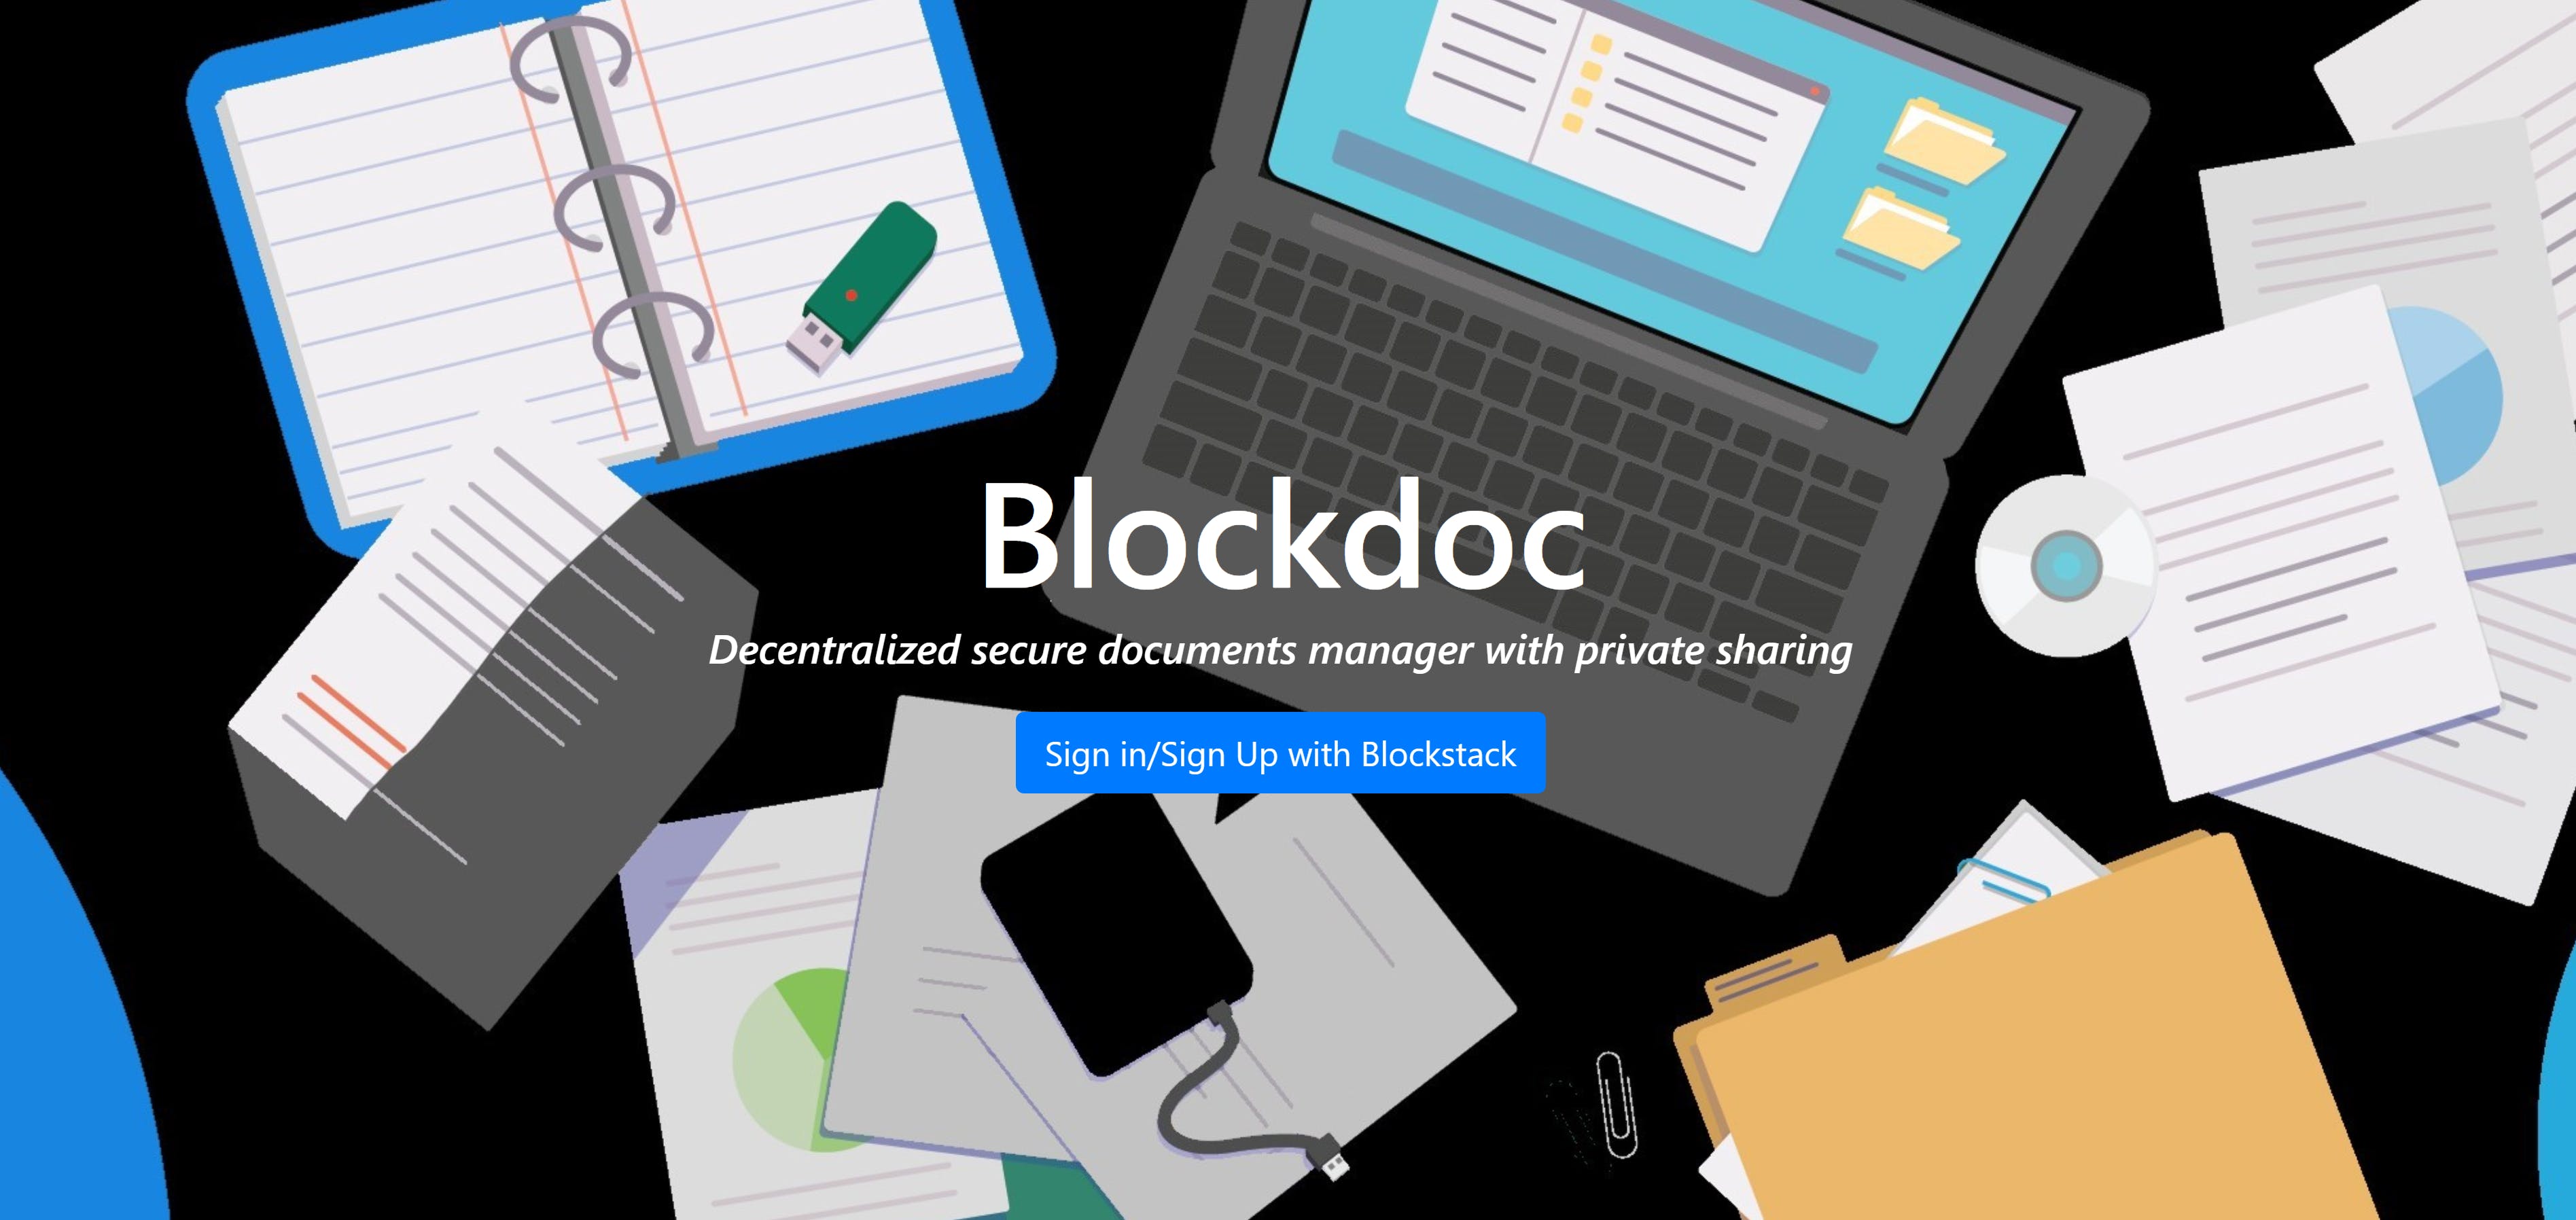 Find detailed information about BlockDoc